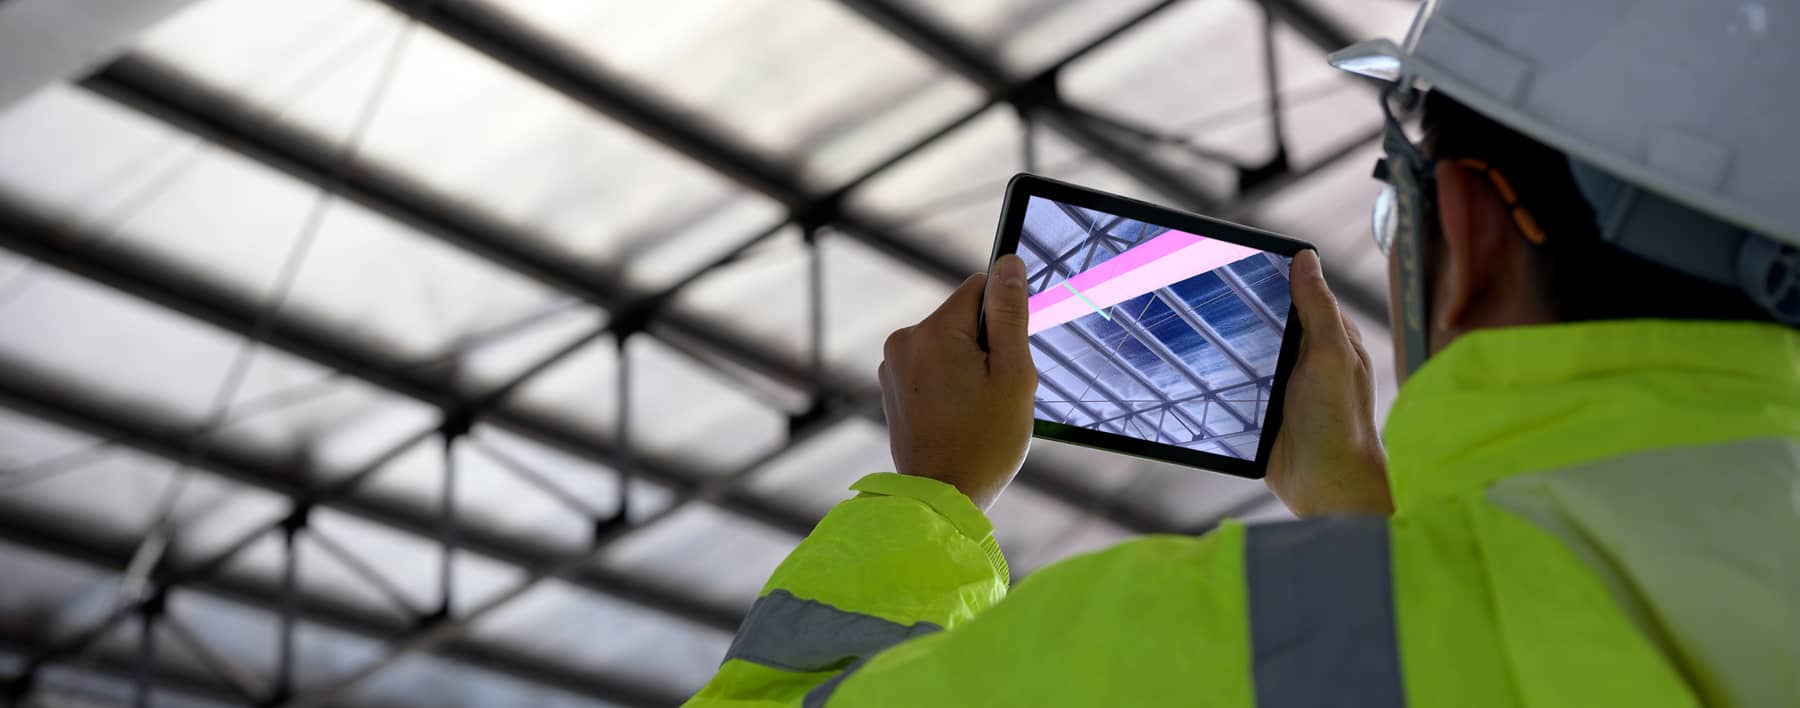 The Impact of Technology on the Construction Industry | GLR, Inc.